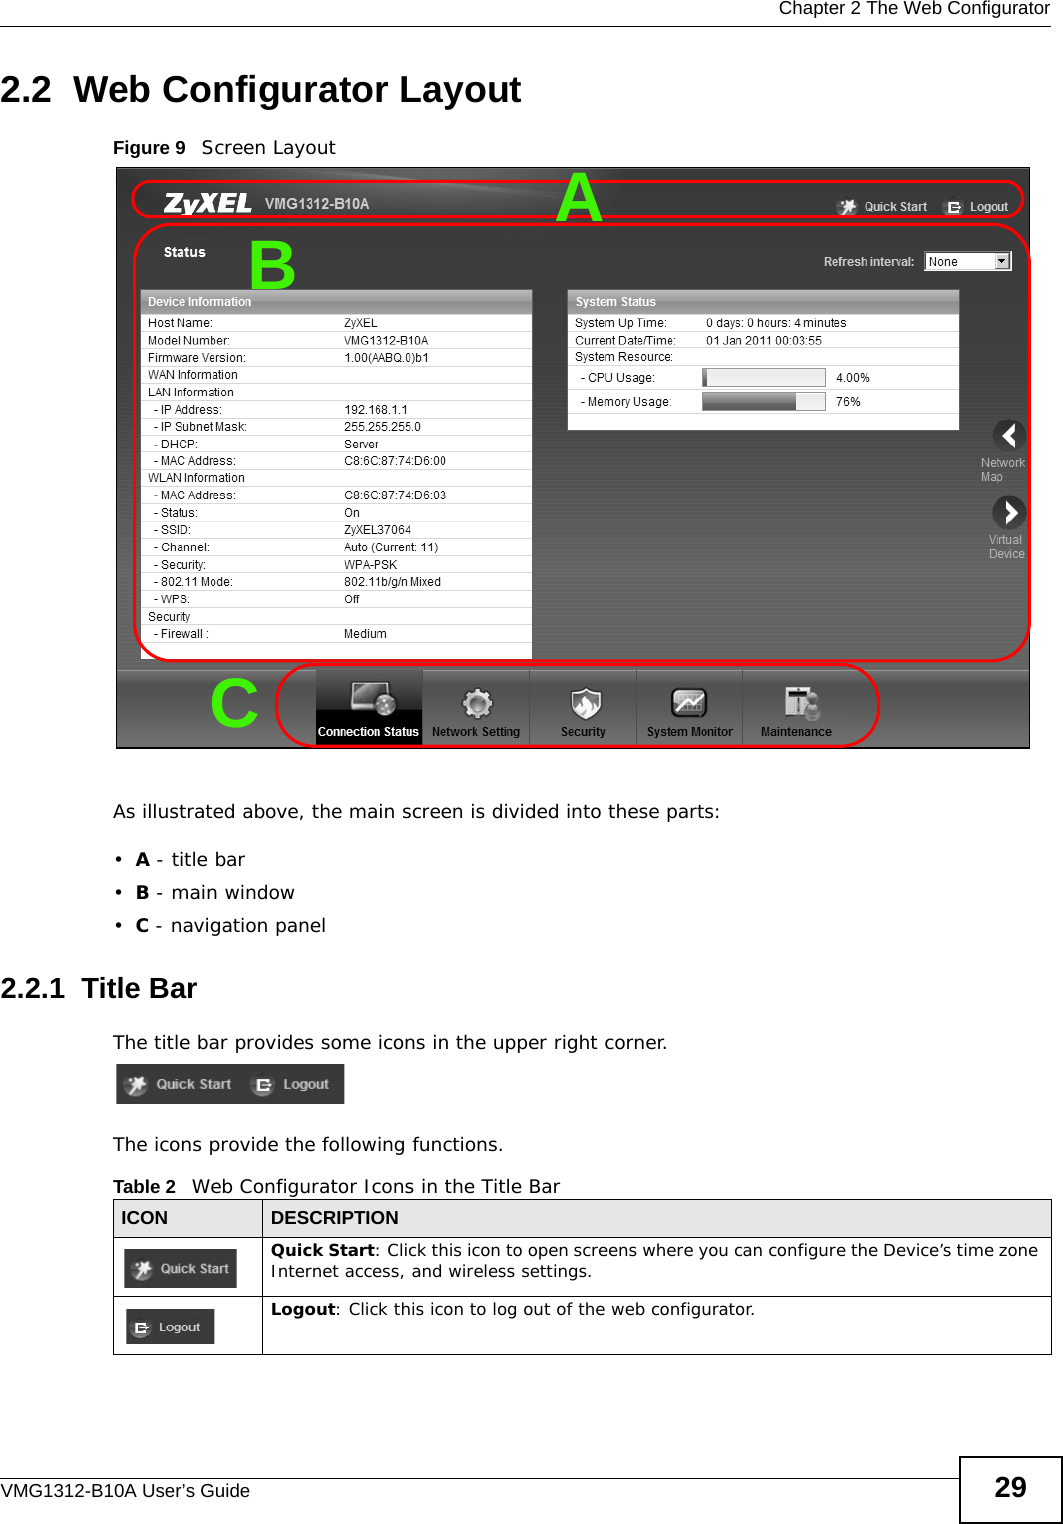  Chapter 2 The Web ConfiguratorVMG1312-B10A User’s Guide 292.2  Web Configurator LayoutFigure 9   Screen LayoutAs illustrated above, the main screen is divided into these parts:•A - title bar•B - main window •C - navigation panel2.2.1  Title BarThe title bar provides some icons in the upper right corner.The icons provide the following functions.BCATable 2   Web Configurator Icons in the Title BarICON  DESCRIPTIONQuick Start: Click this icon to open screens where you can configure the Device’s time zone Internet access, and wireless settings.Logout: Click this icon to log out of the web configurator.